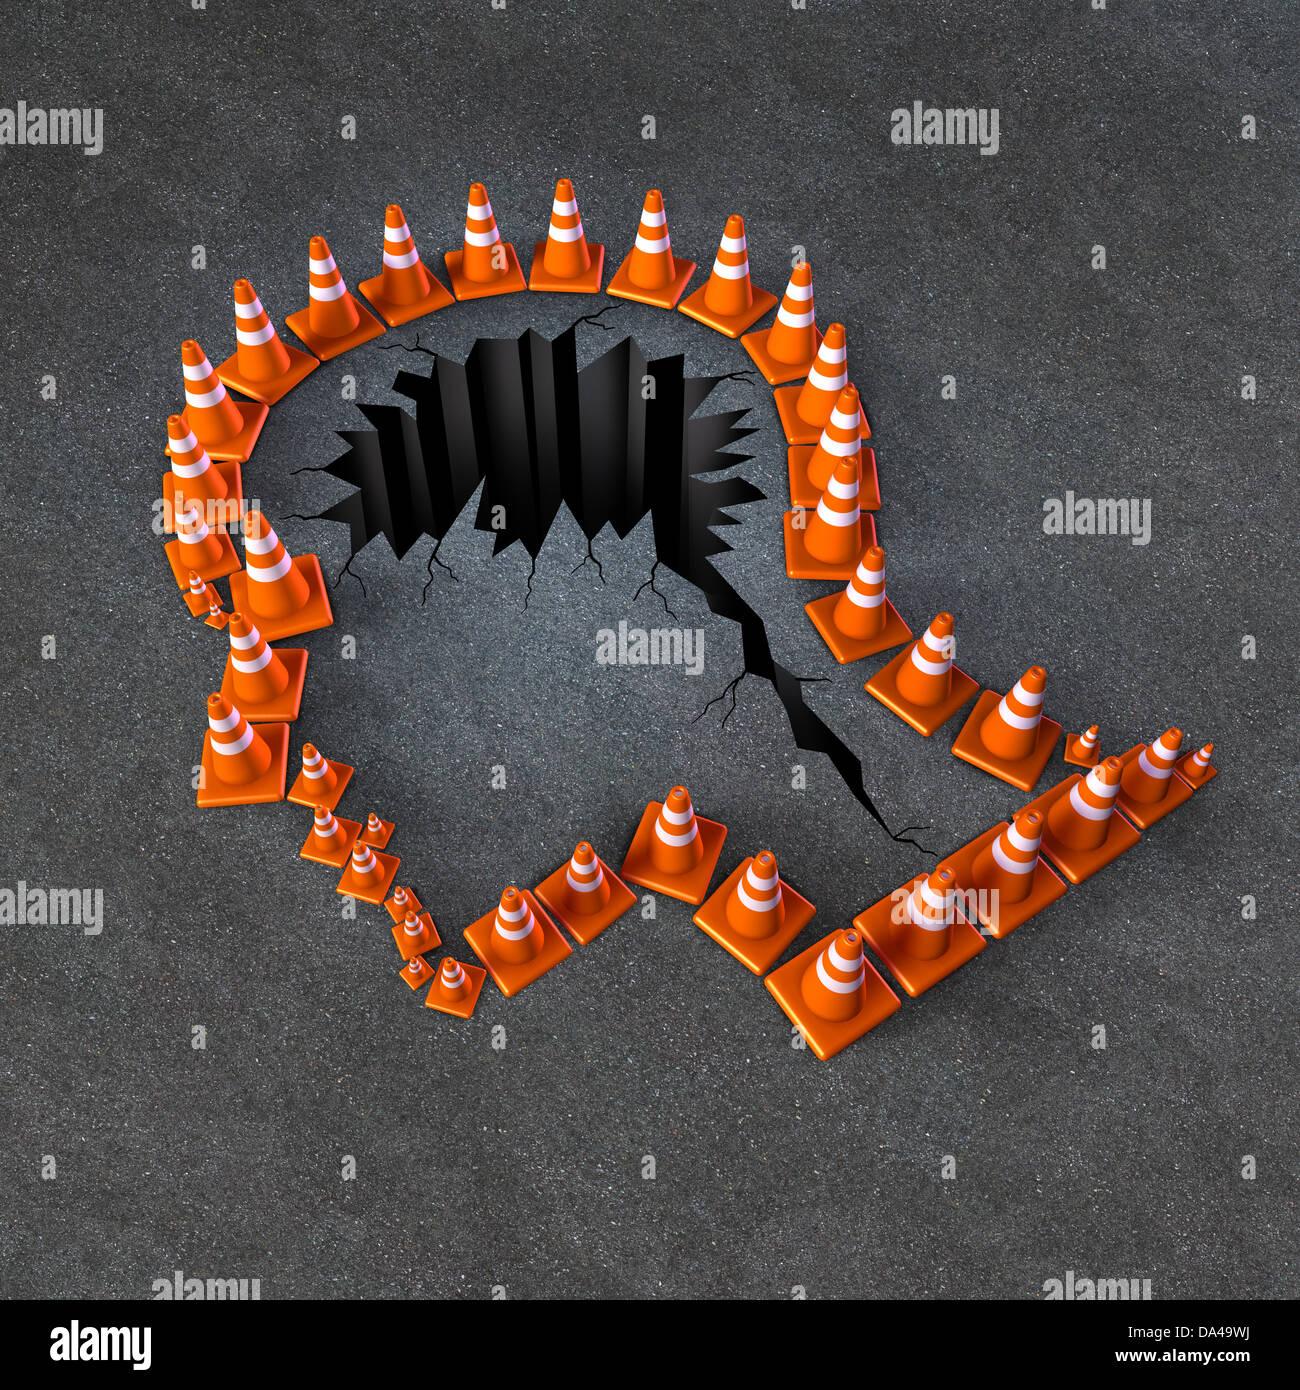 Brain therapy and memory damage medical concept with a group of warning orange traffic cones in the shape of a human head and the thinkinkg anatomy in the shape of a cracked broken hole in asphalt. Stock Photo